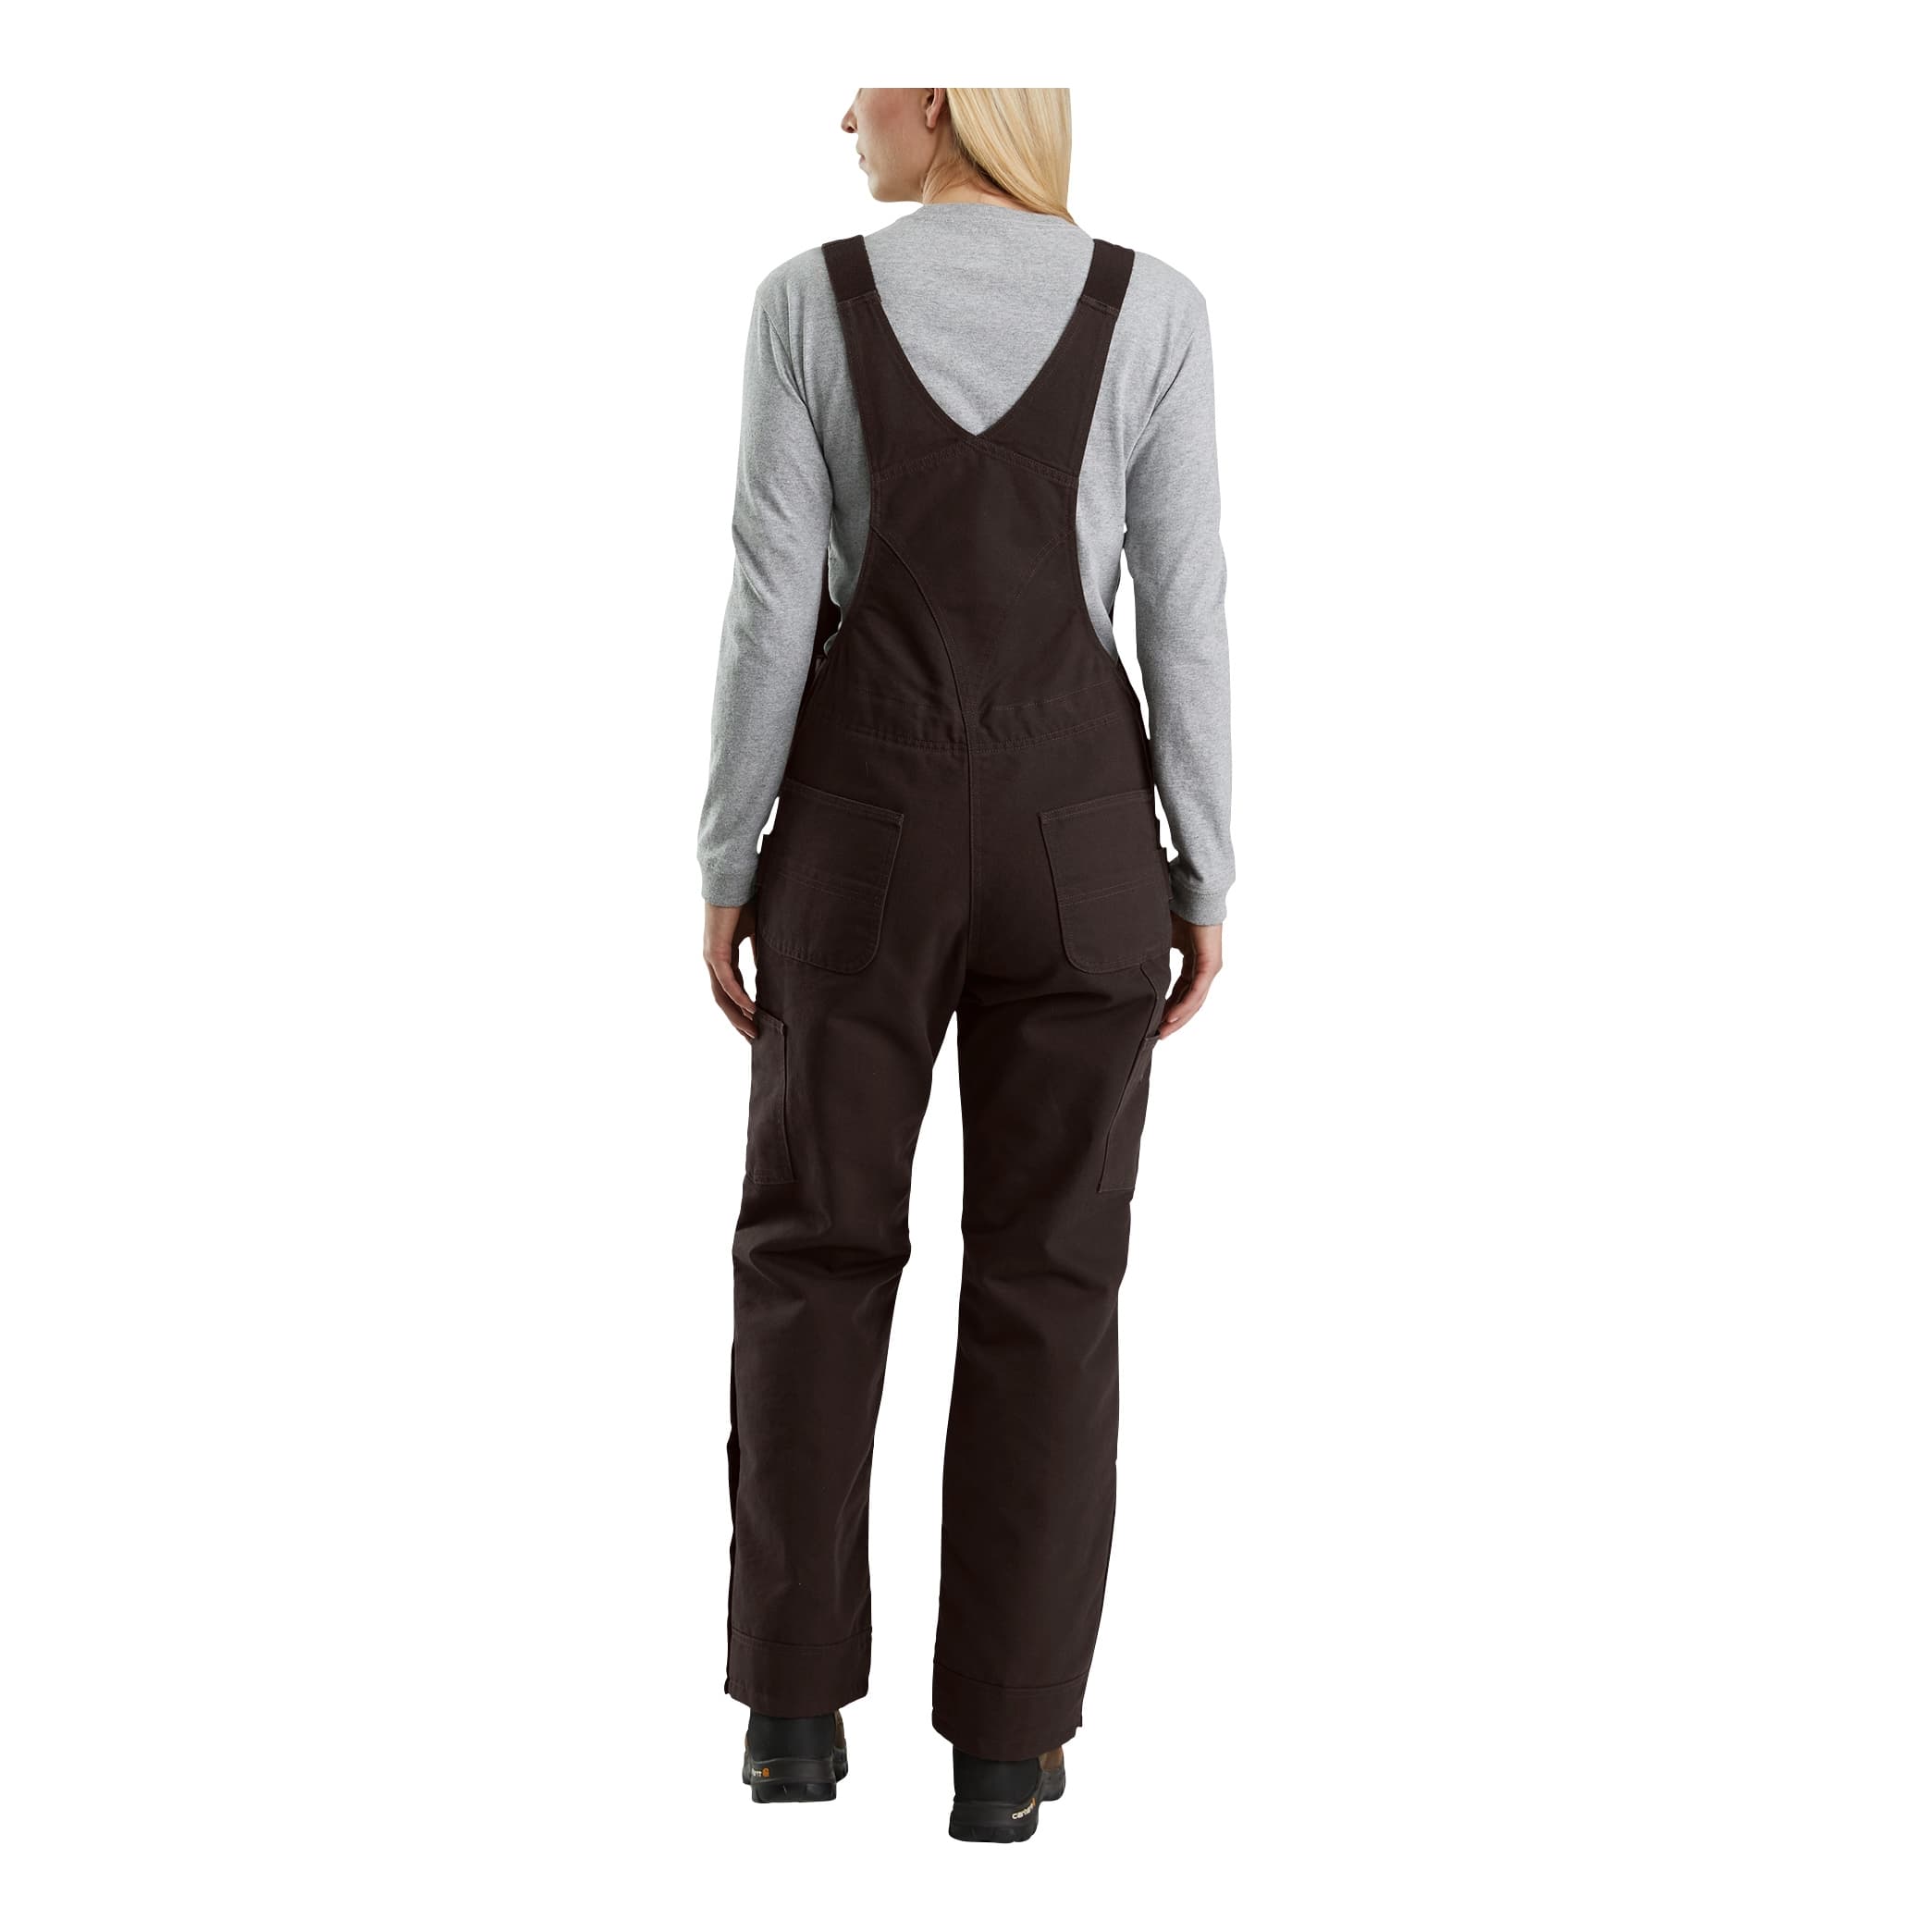 Carhartt® Women’s Relaxed Fit Washed Duck Insulated Bib Overall - back